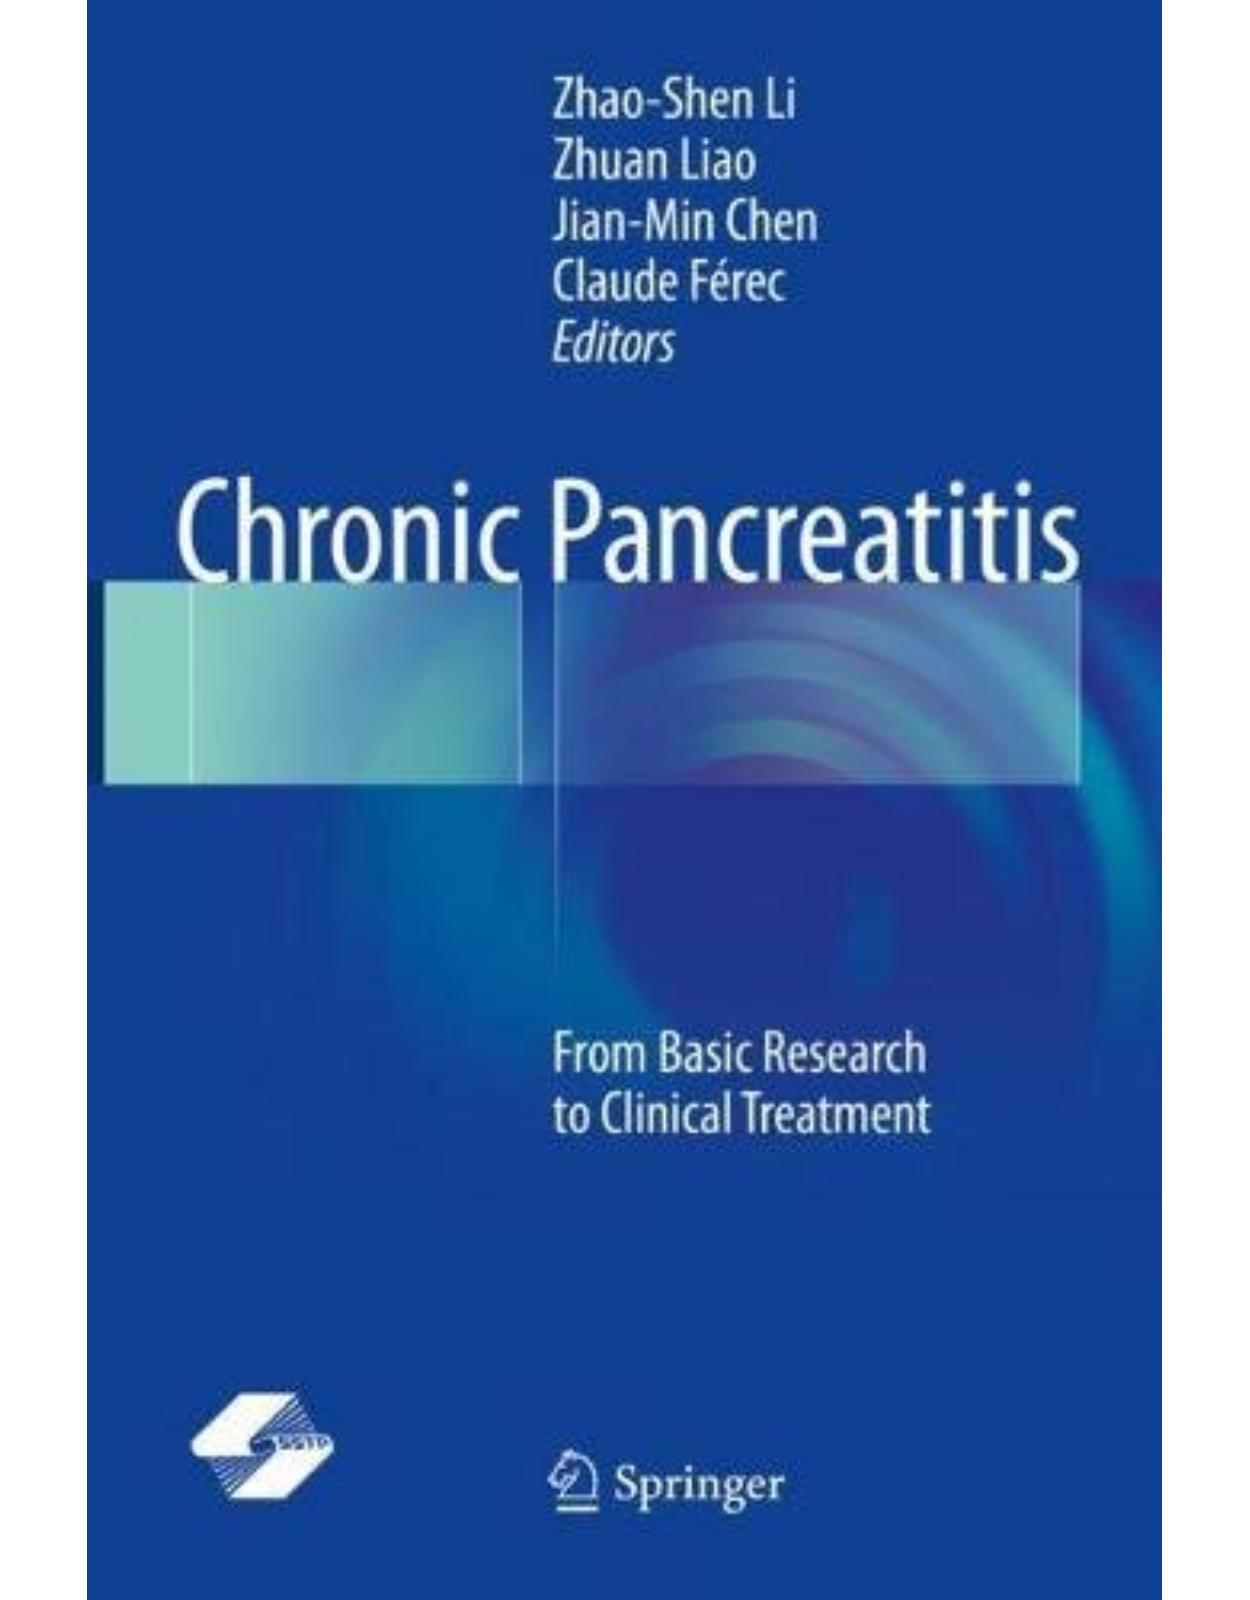 Chronic Pancreatitis: From Basic Research to Clinical Treatment